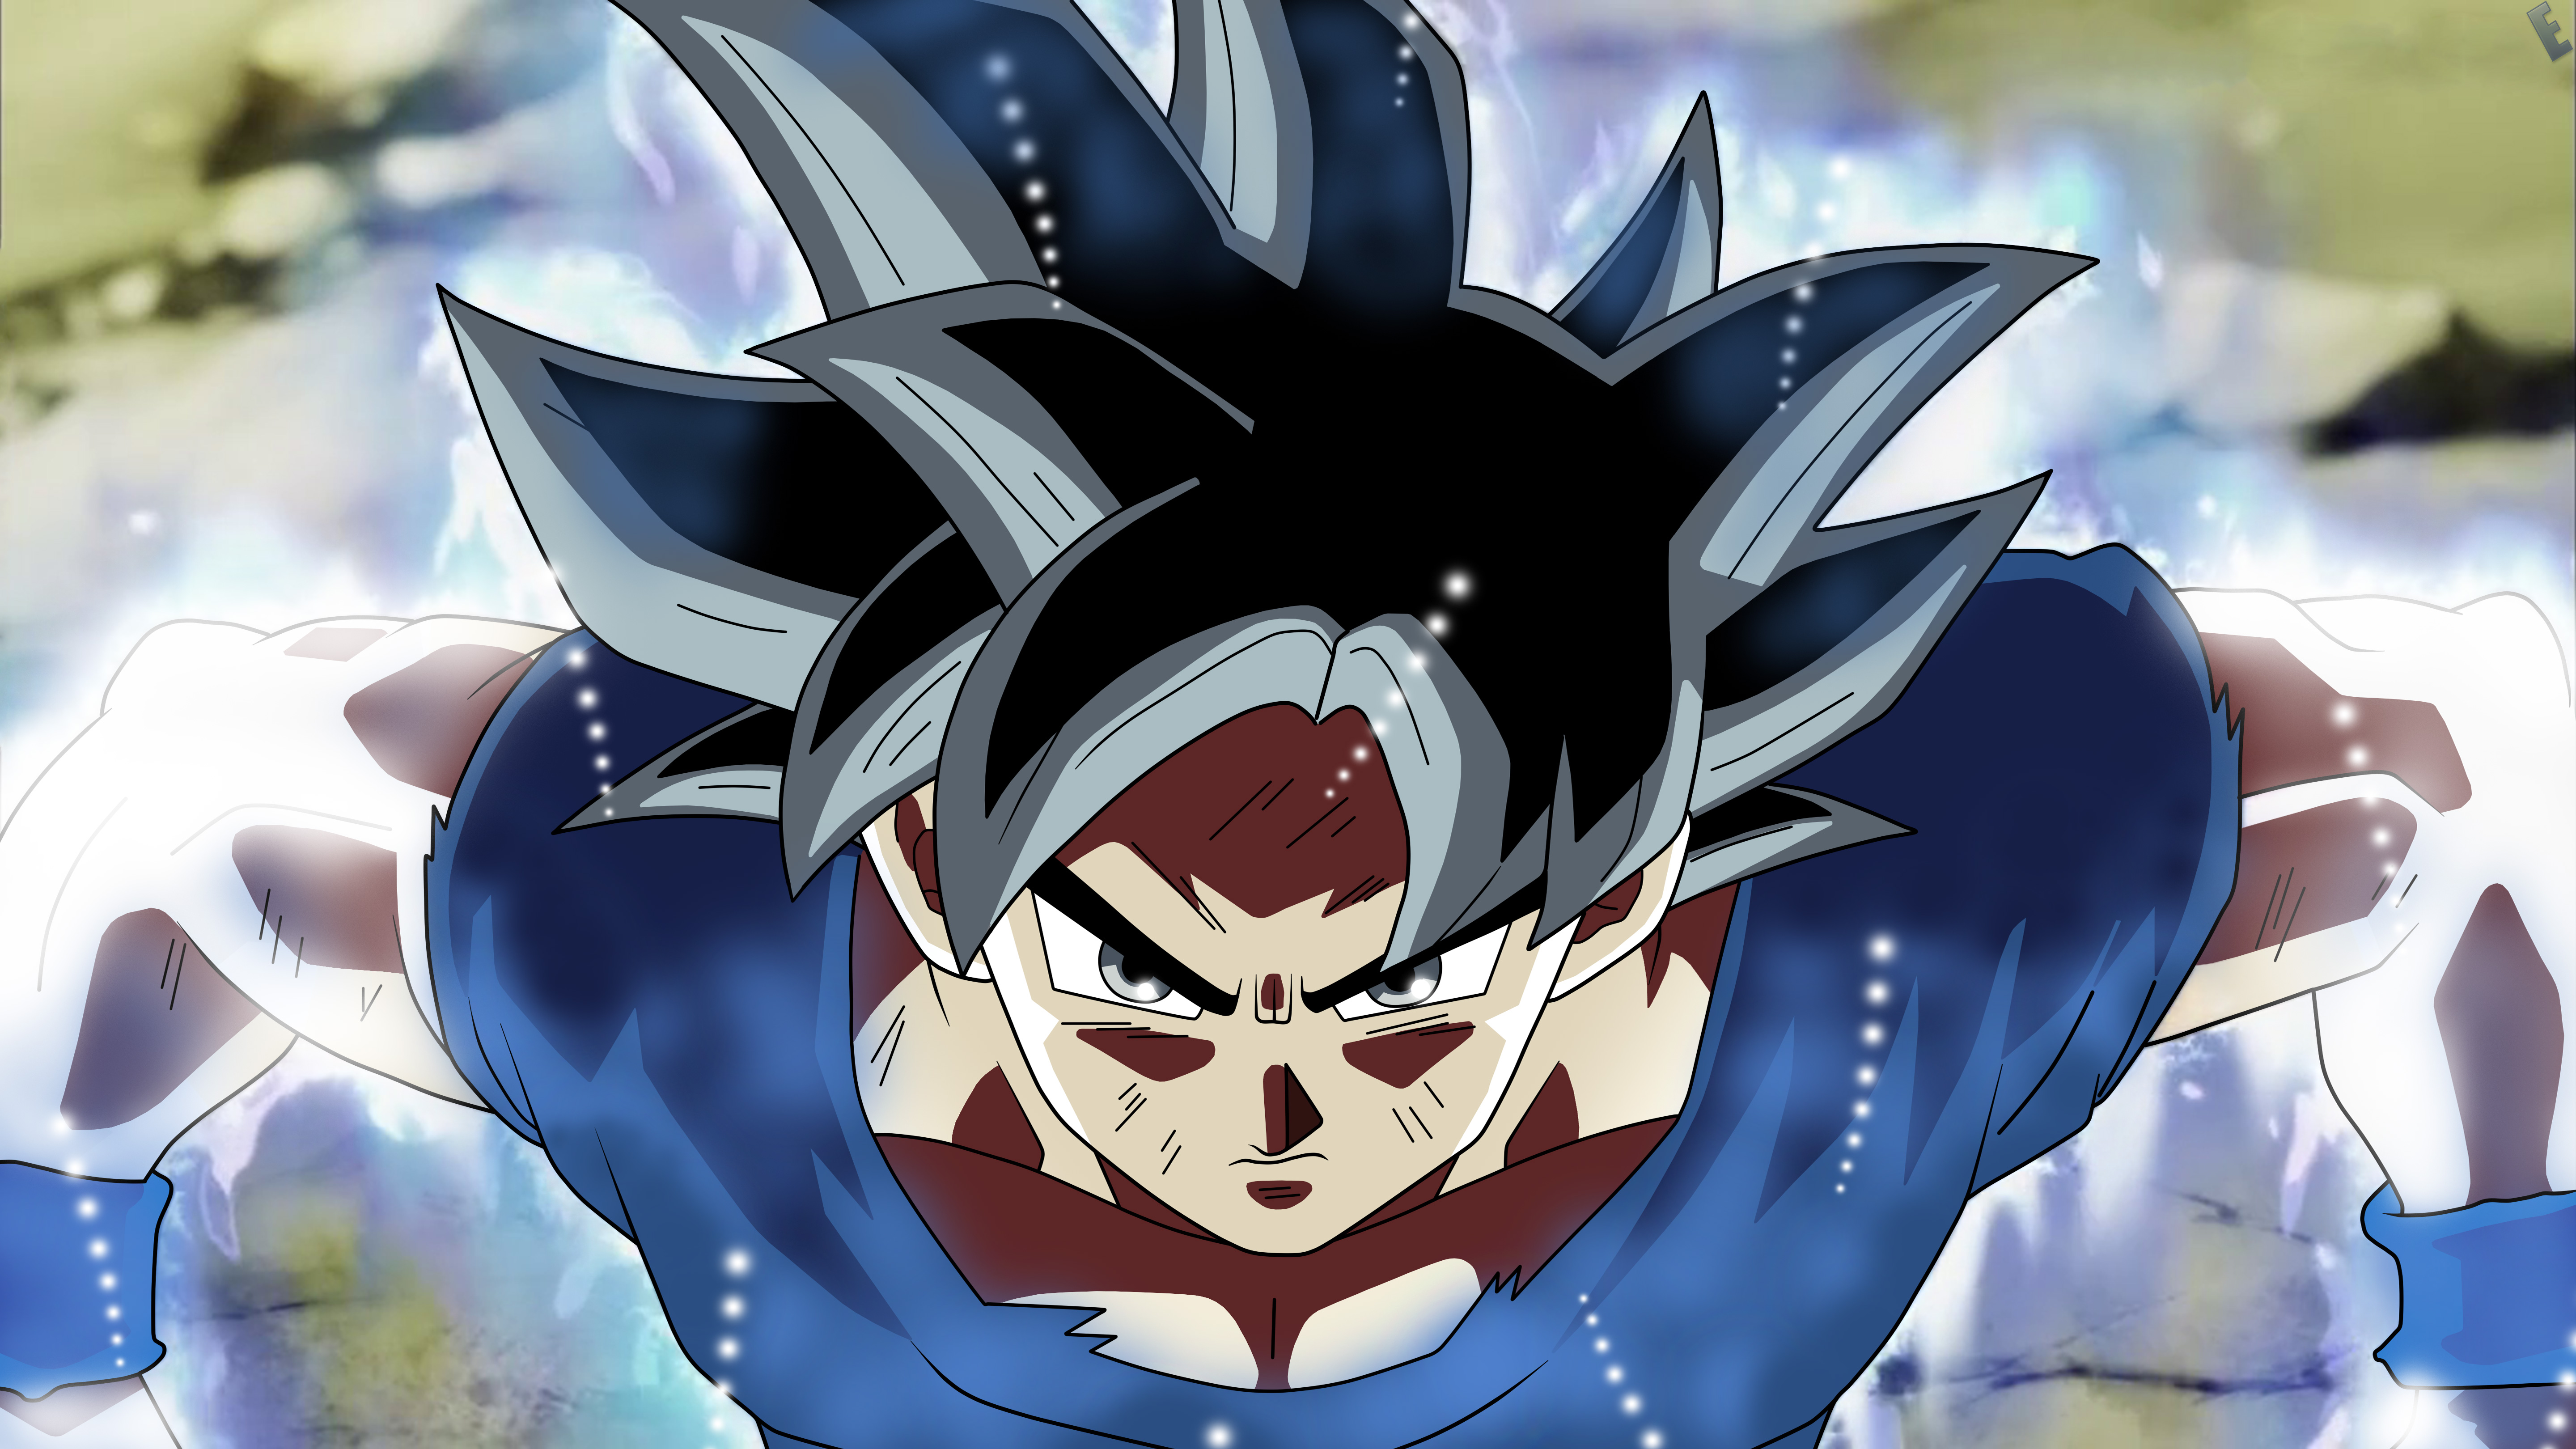 Goku Dragon Ball Super Anime 5k, HD Anime, 4k Wallpapers, Images, Backgrounds, Photos and Pictures